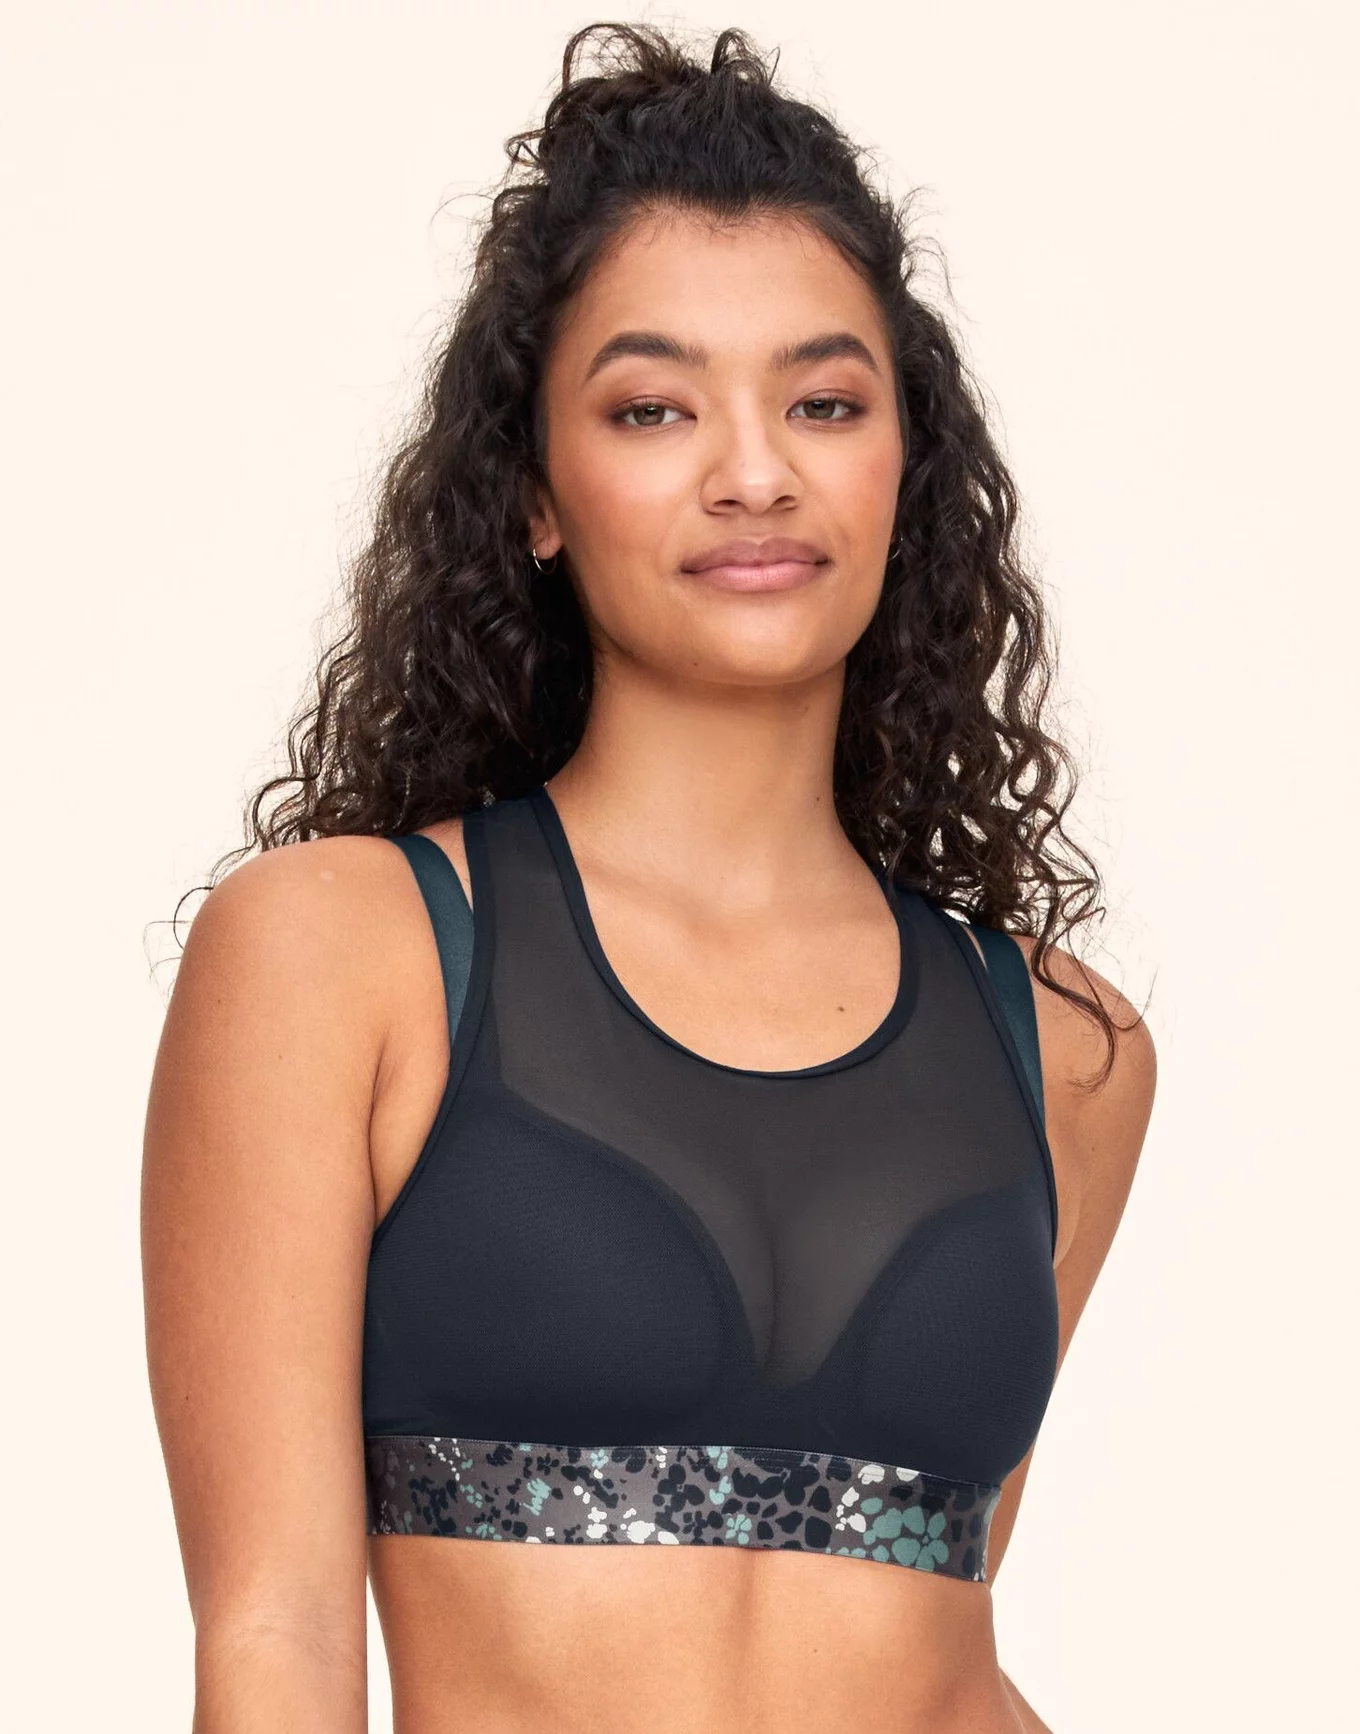 One bra that can be worn two different ways? We love a multitasker